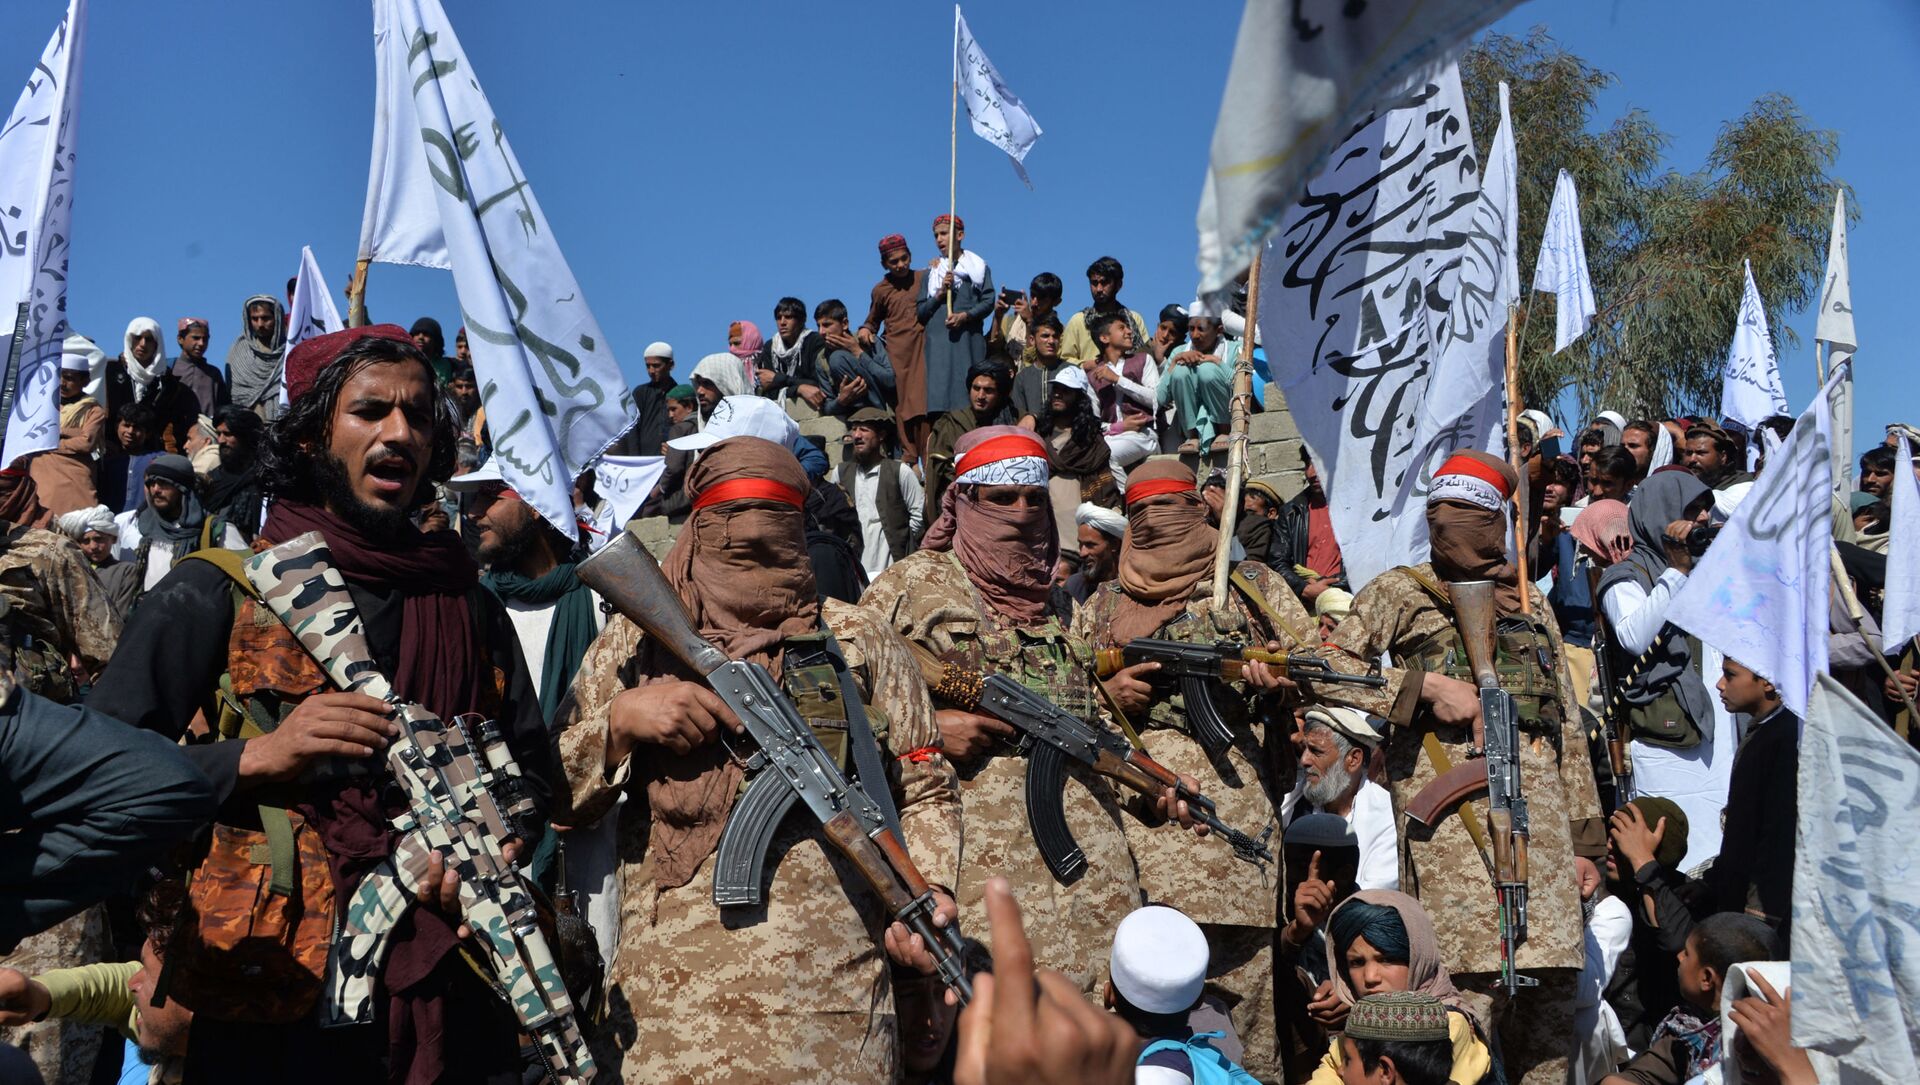 Afghan Taliban militants and villagers attend a gathering as they celebrate the peace deal and their victory in the Afghan conflict on US in Afghanistan, in Alingar district of Laghman Province on March 2, 2020 - Sputnik International, 1920, 15.08.2021